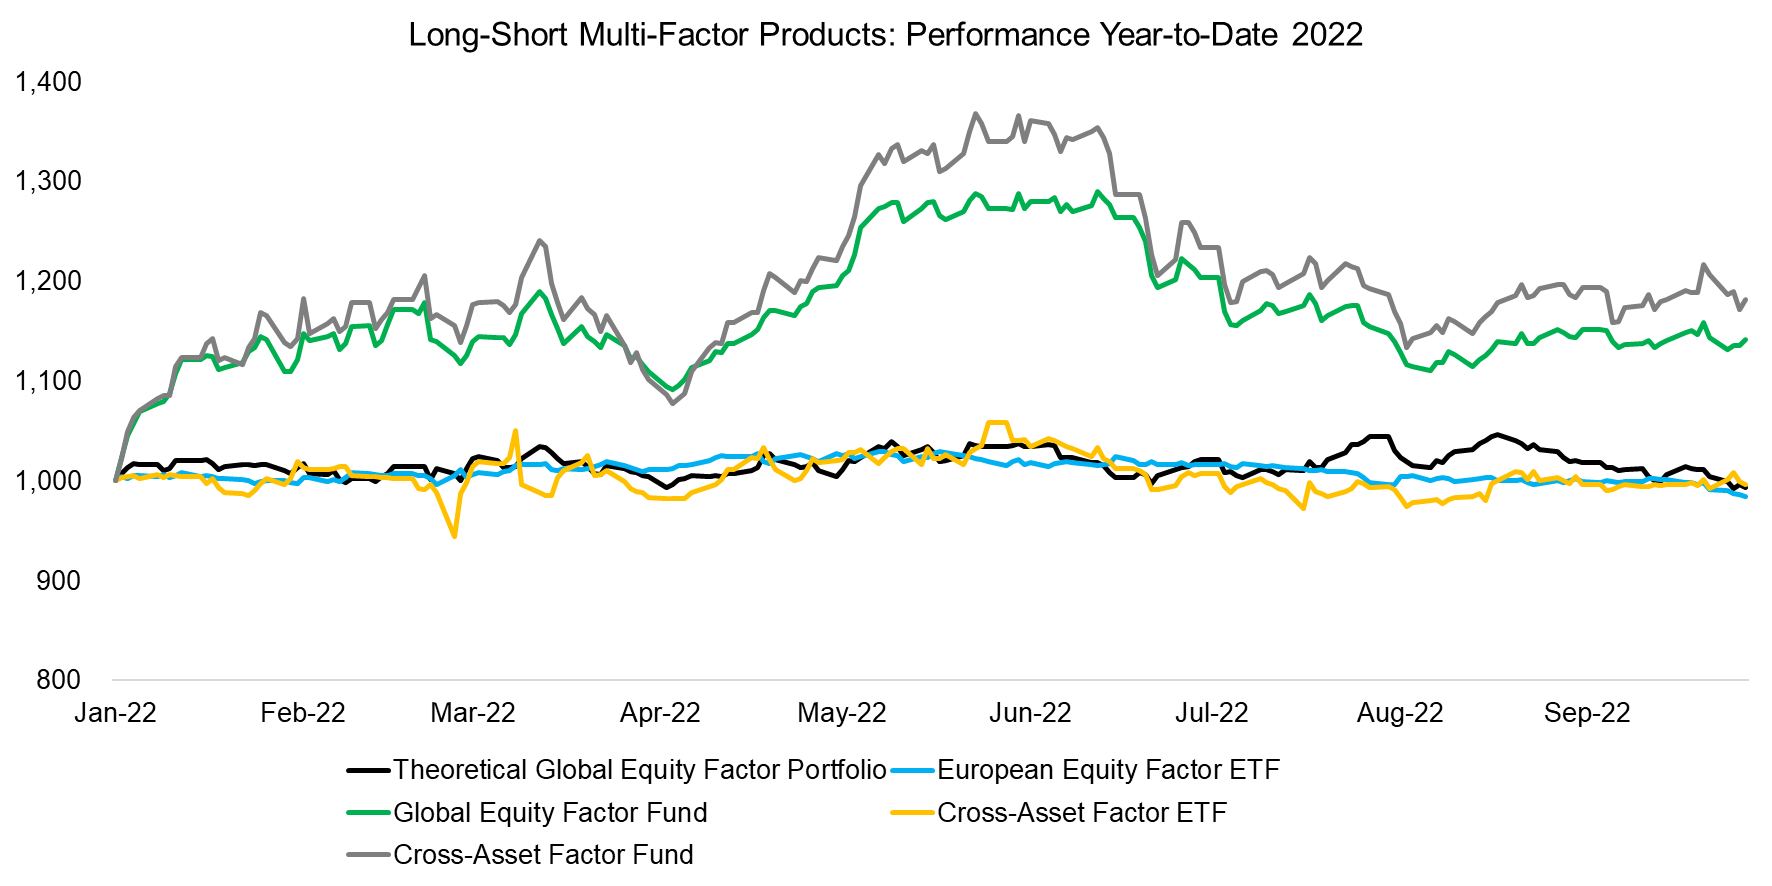 Long-Short Multi-Factor Products Performance Year-to-Date 2022